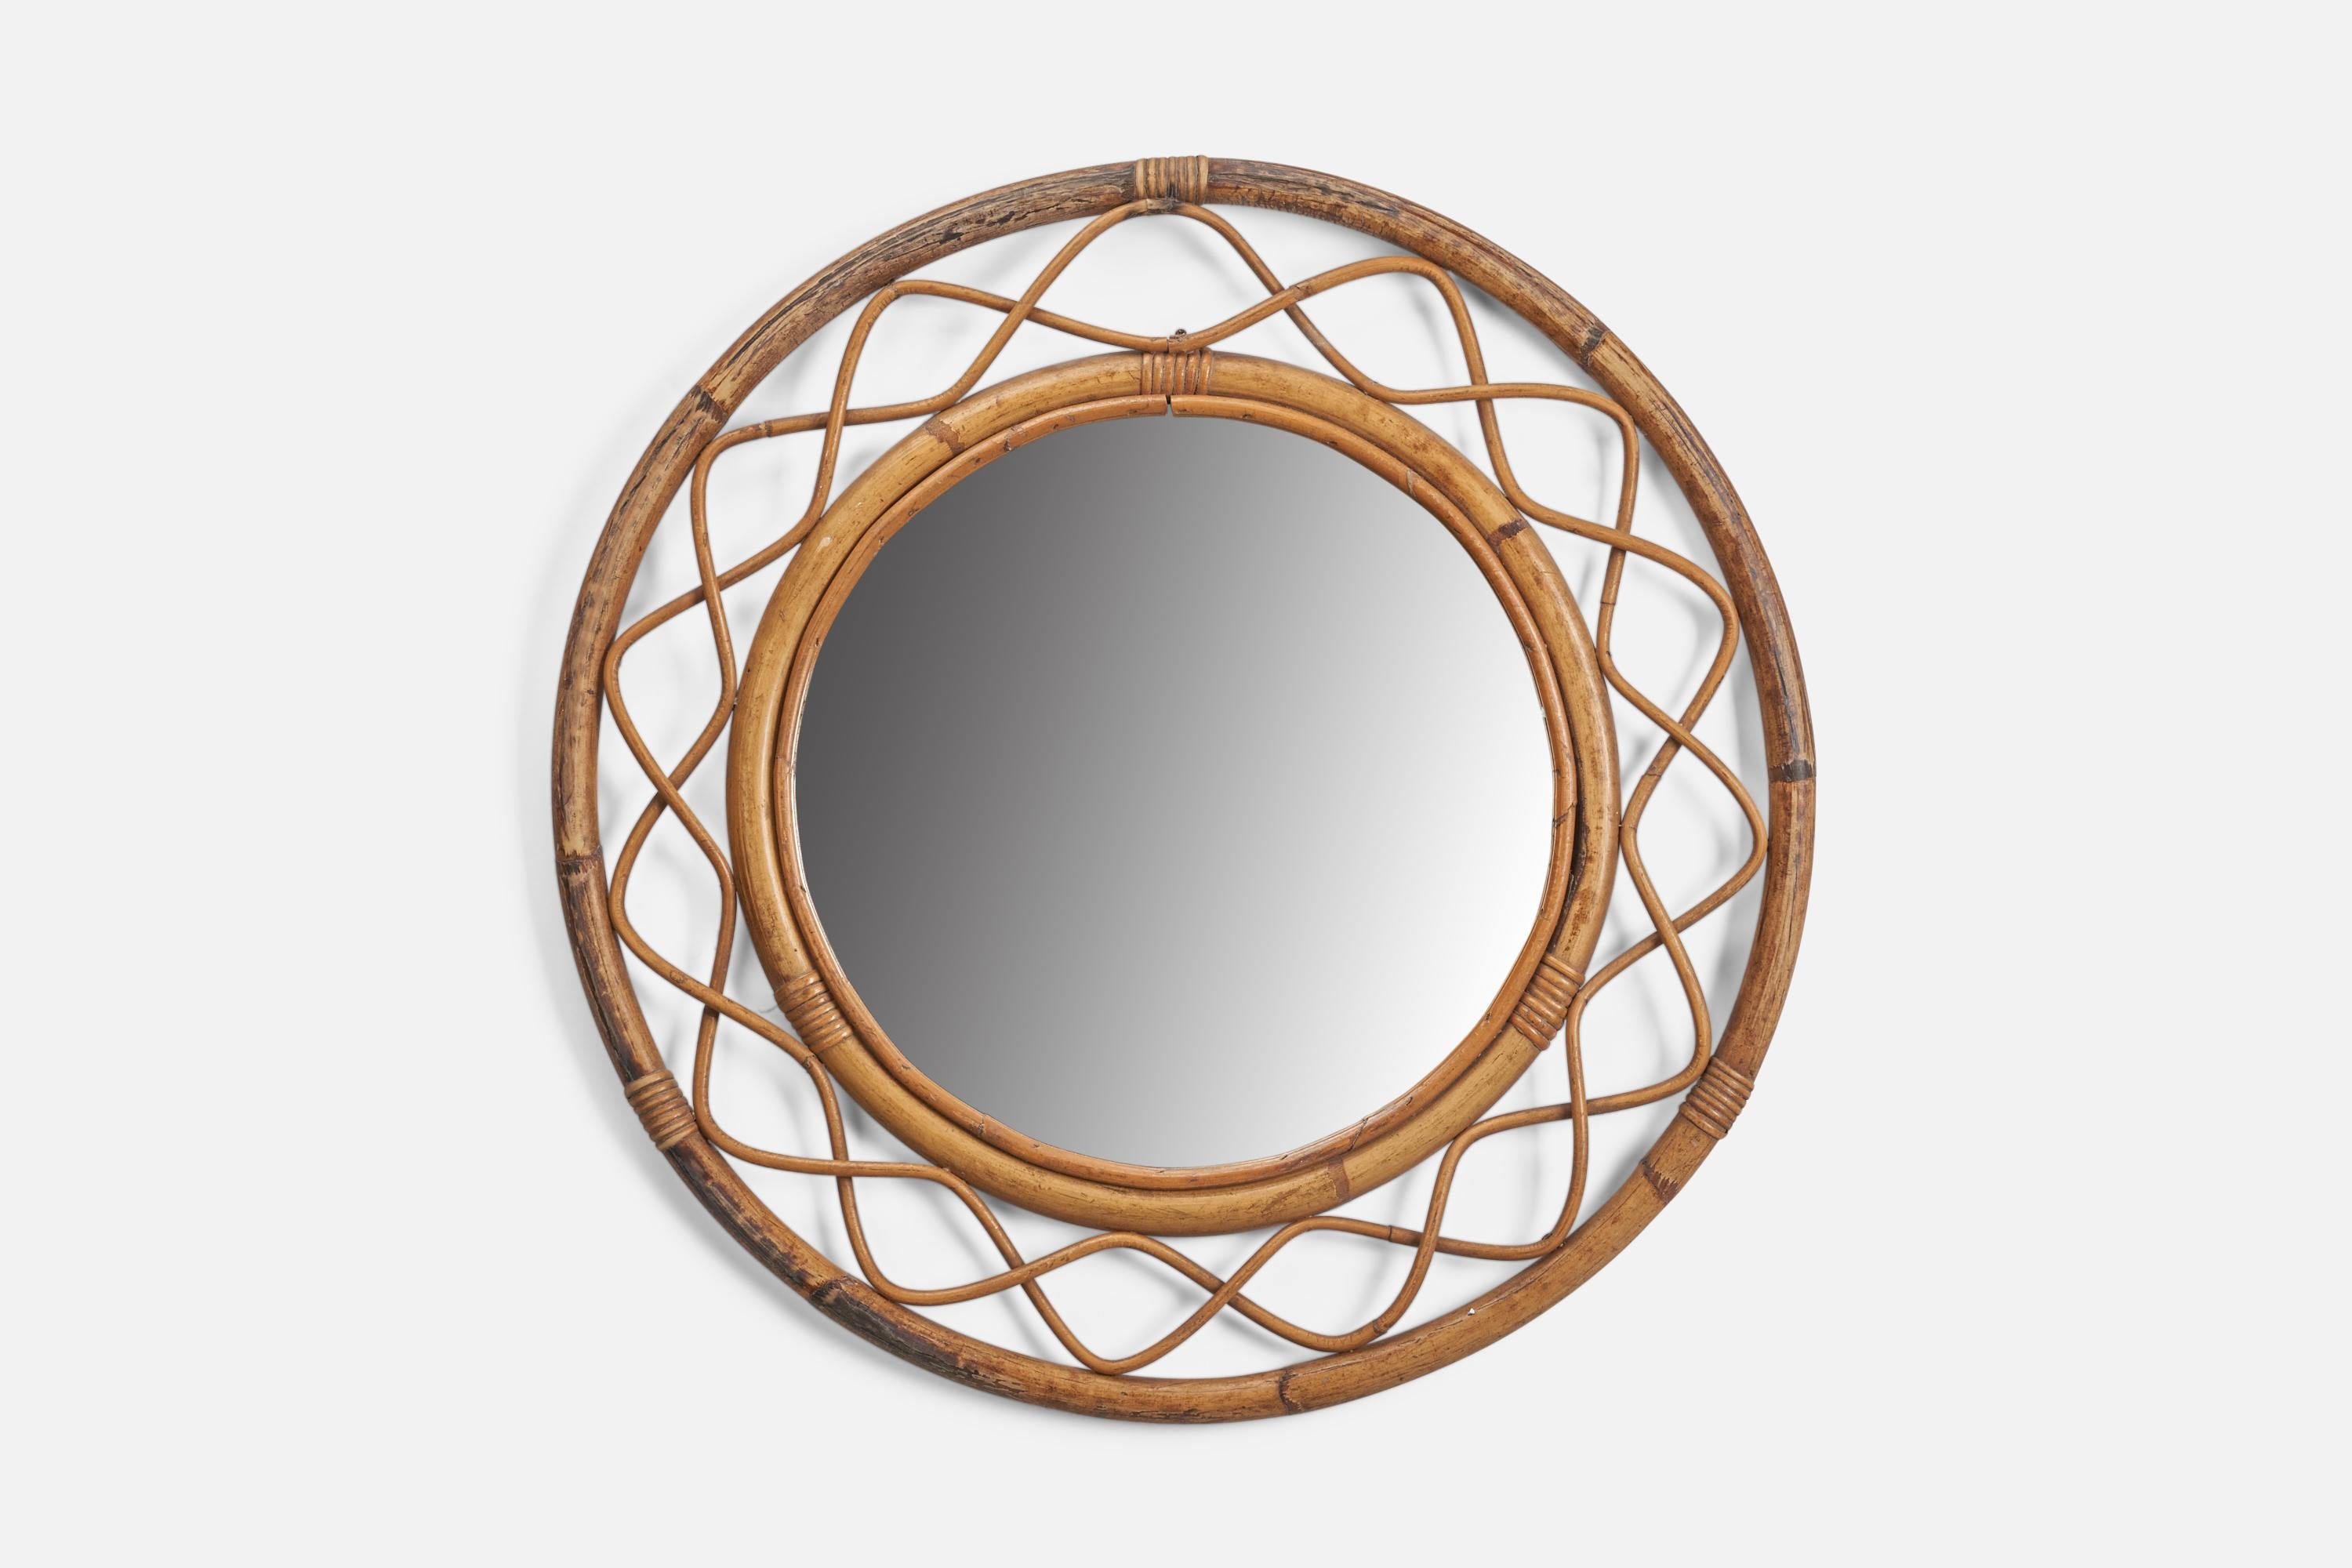 A rattan, bamboo, glass wall mirror designed and produced by a Swedish Designer, Sweden, 1960s.